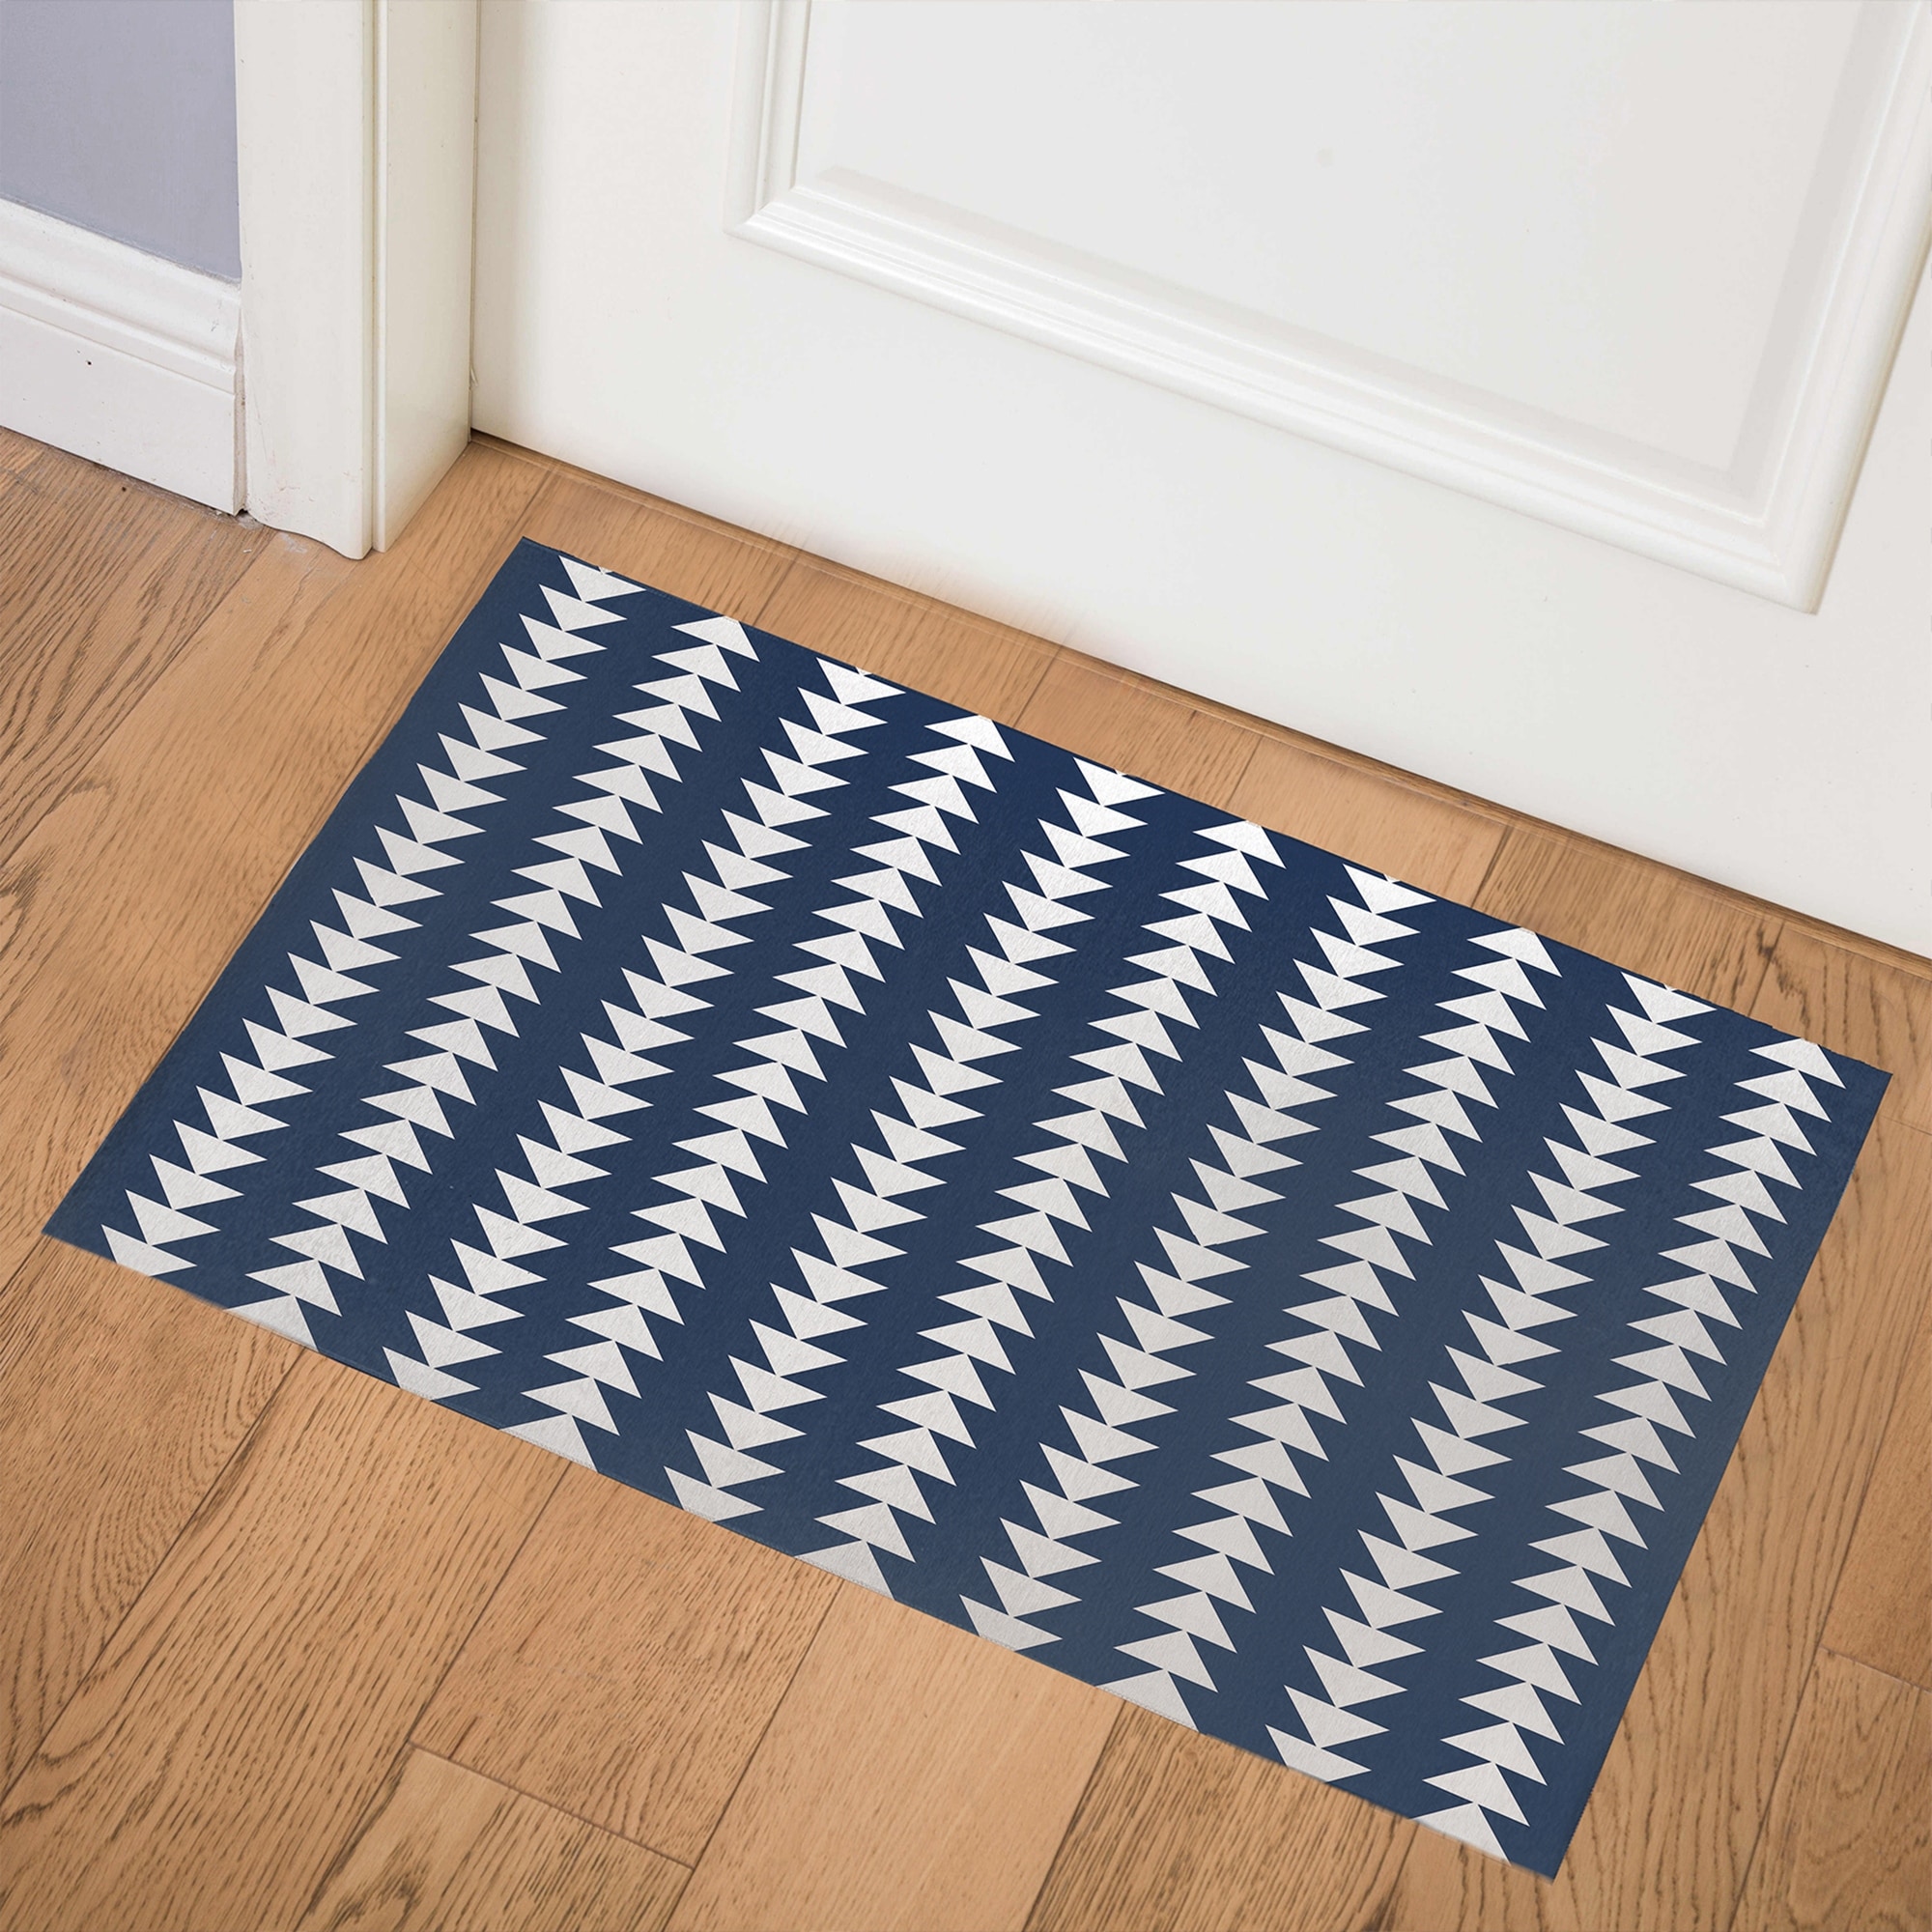 https://ak1.ostkcdn.com/images/products/is/images/direct/7278b338aefa1454570cd2b51ea01a0378b5a8da/KILIM-STRIPE-NAVY-Indoor-Floor-Mat-By-Becky-Bailey.jpg